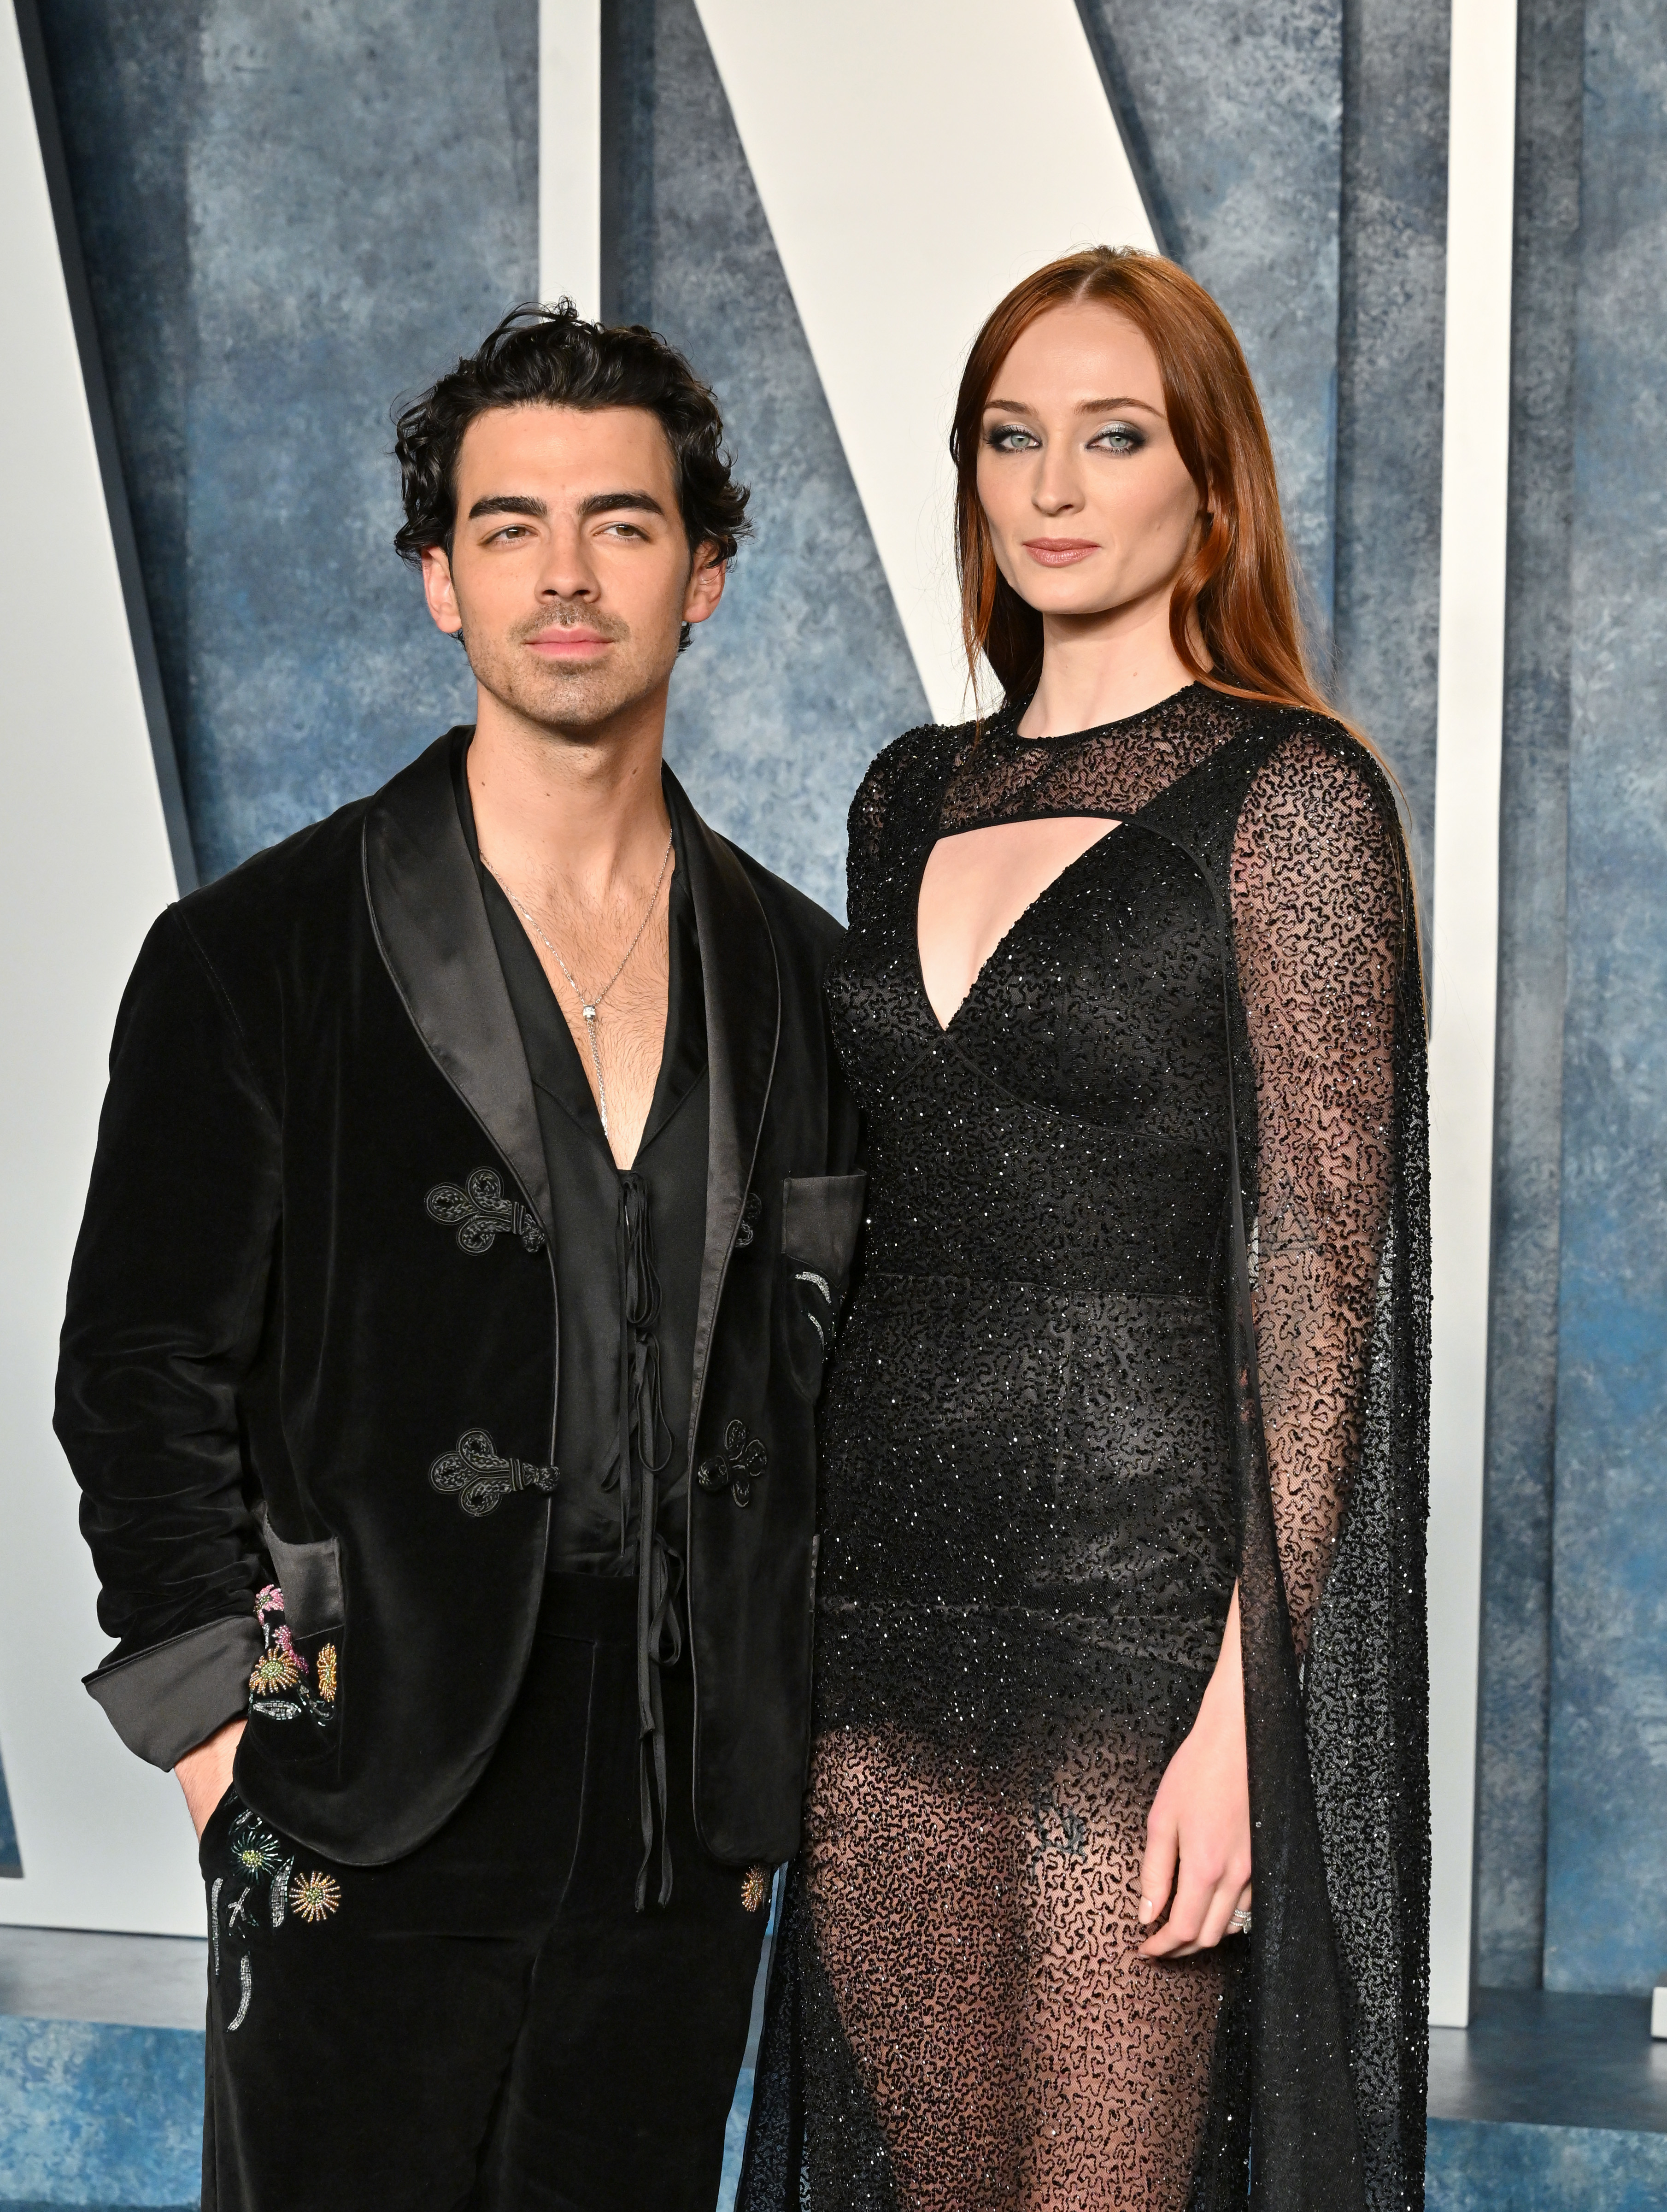 Close-up of Joe and Sophie at a media event